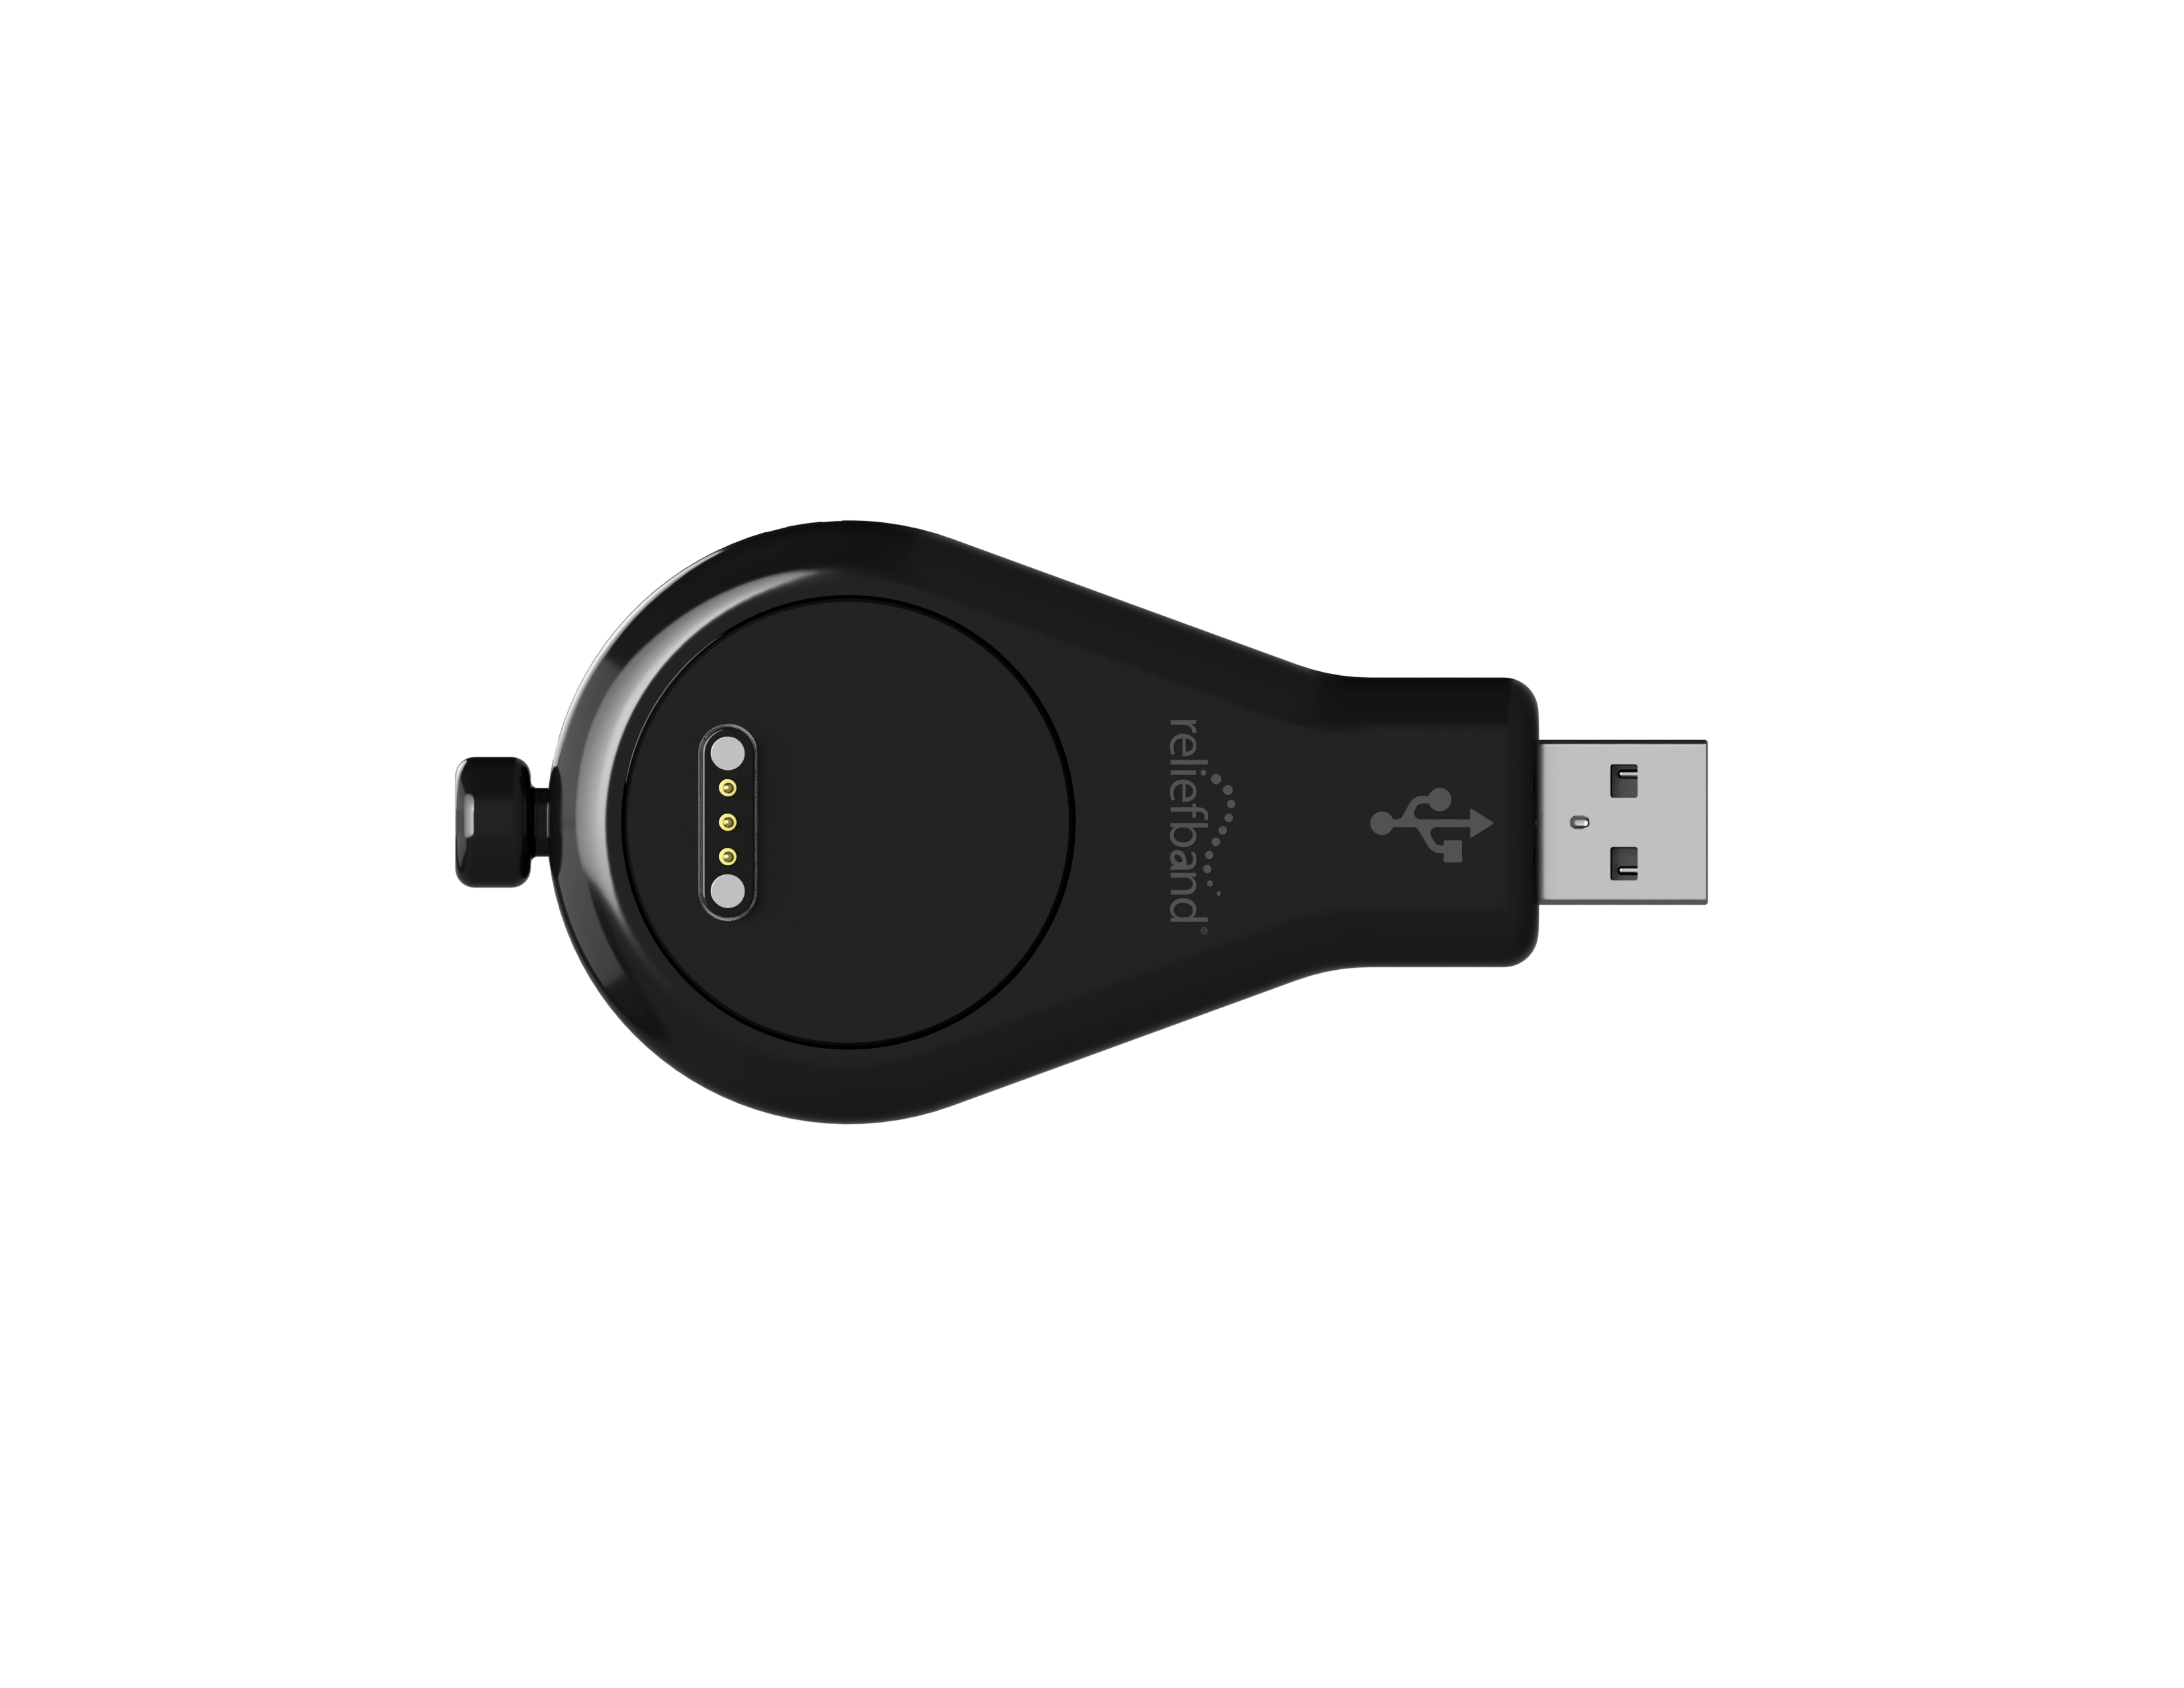 Reliefband® Premier & Sport USB Charger